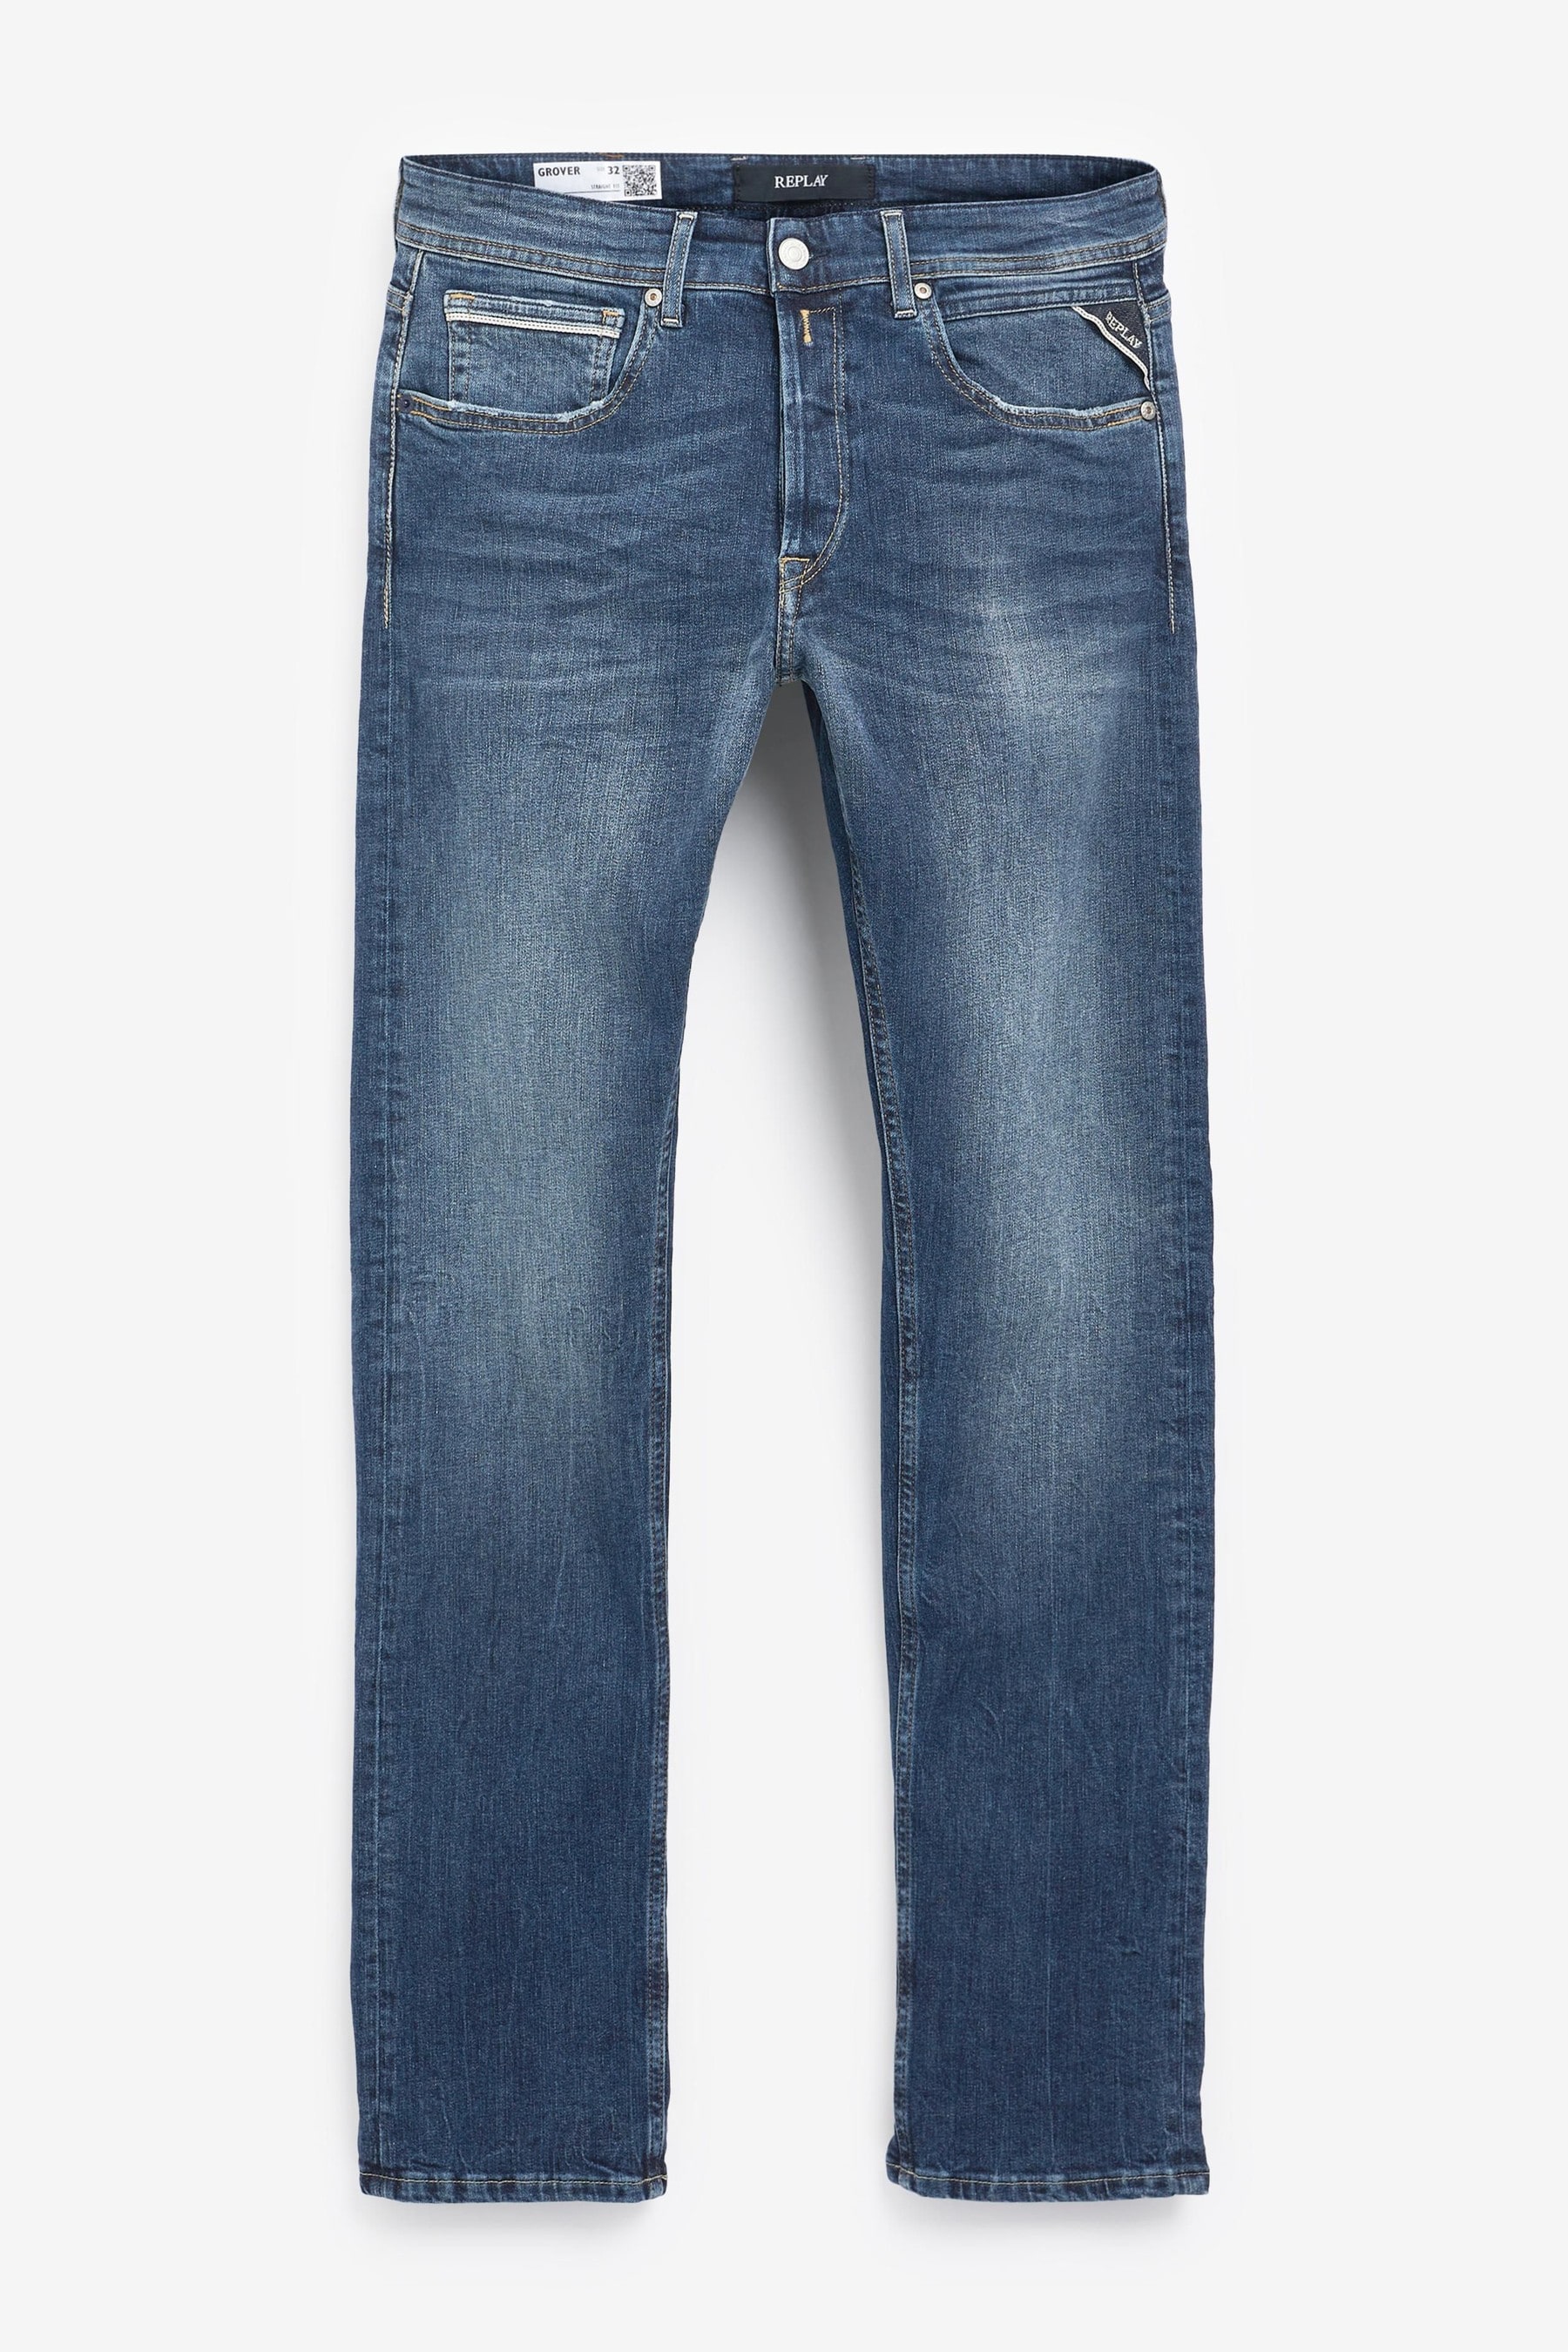 Buy Replay Straight Leg Grover Fit Jeans from the Next UK online shop